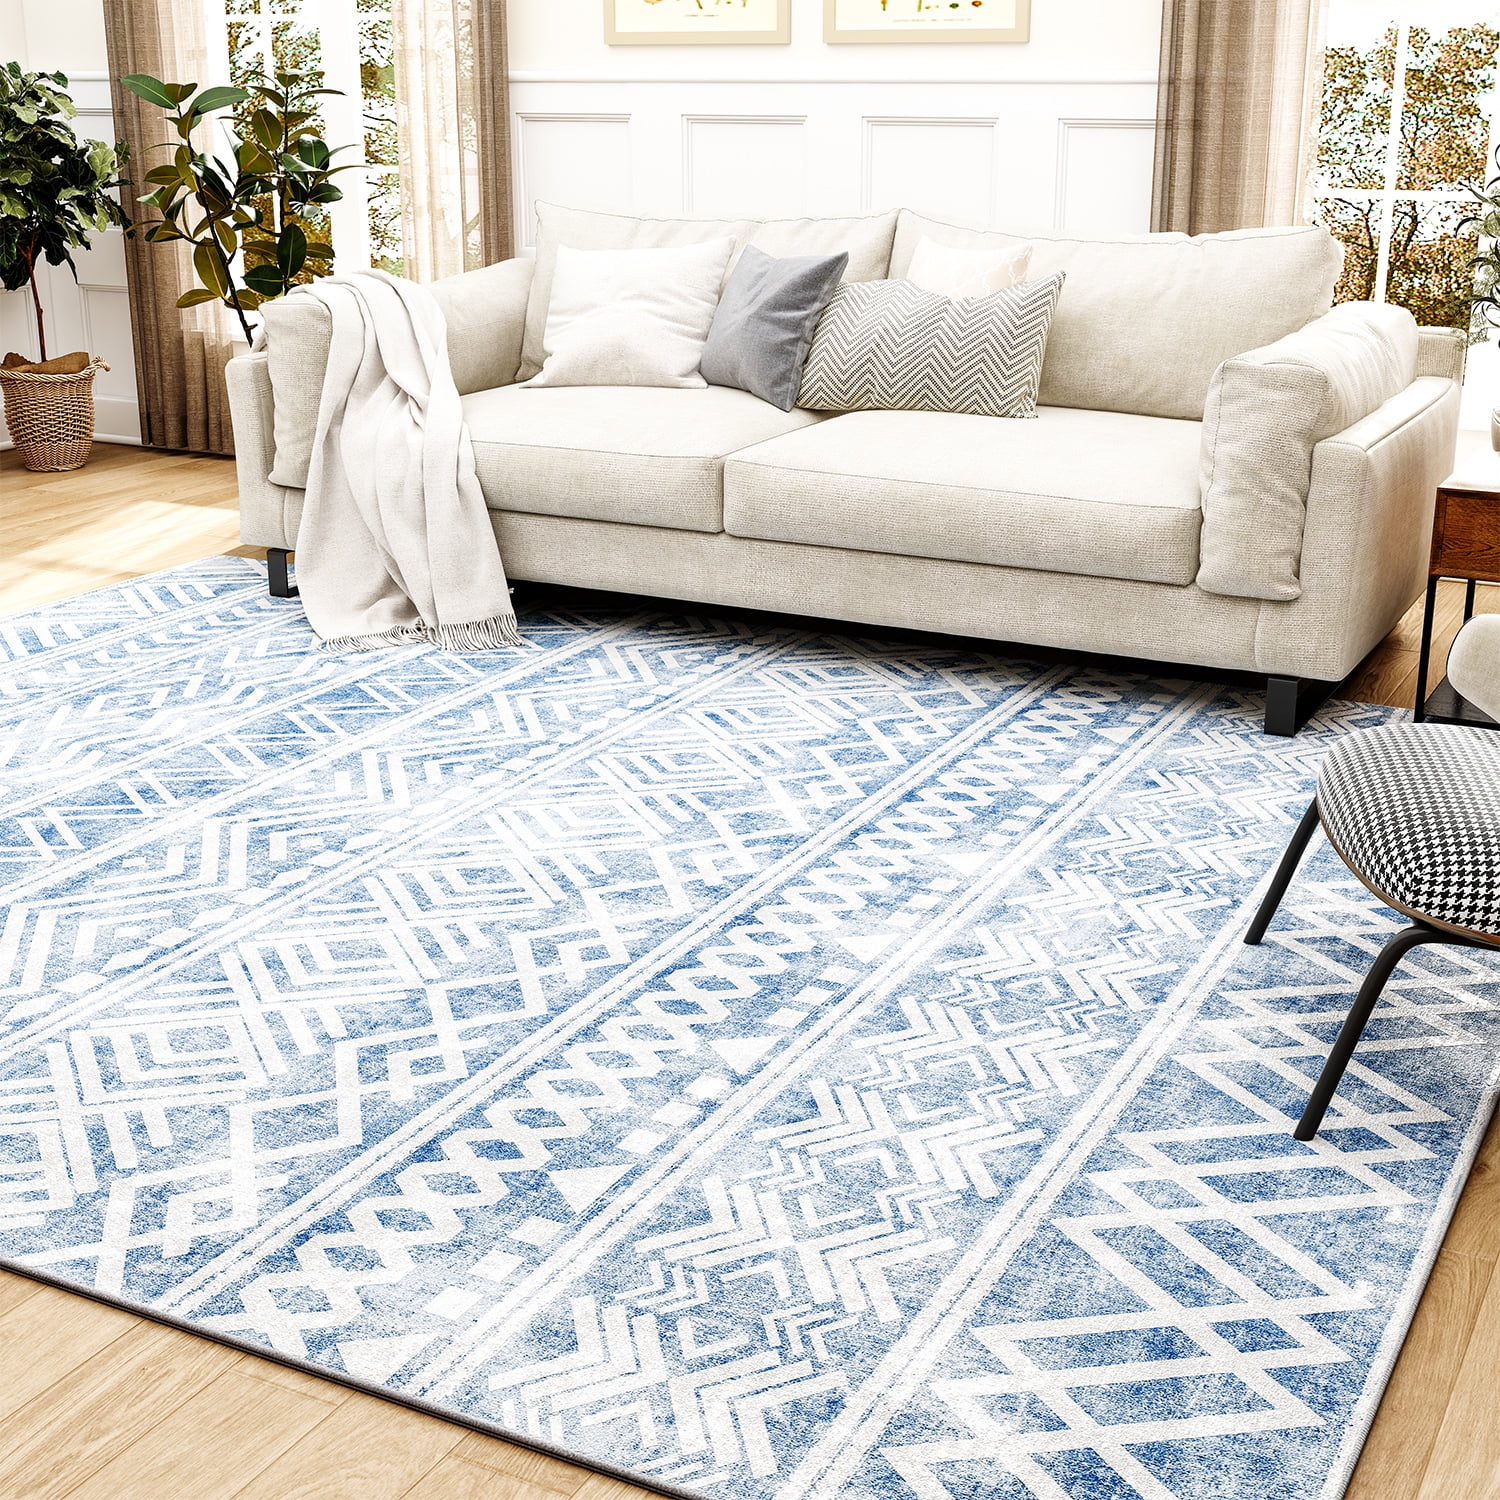 Sixhome 5'x7' Area Rugs for Living Room Modern Abstract Area Rugs Machine Washable Rugs Distressed Rugs Bedroom Dining Room Kitchen Carpet Grey, Size